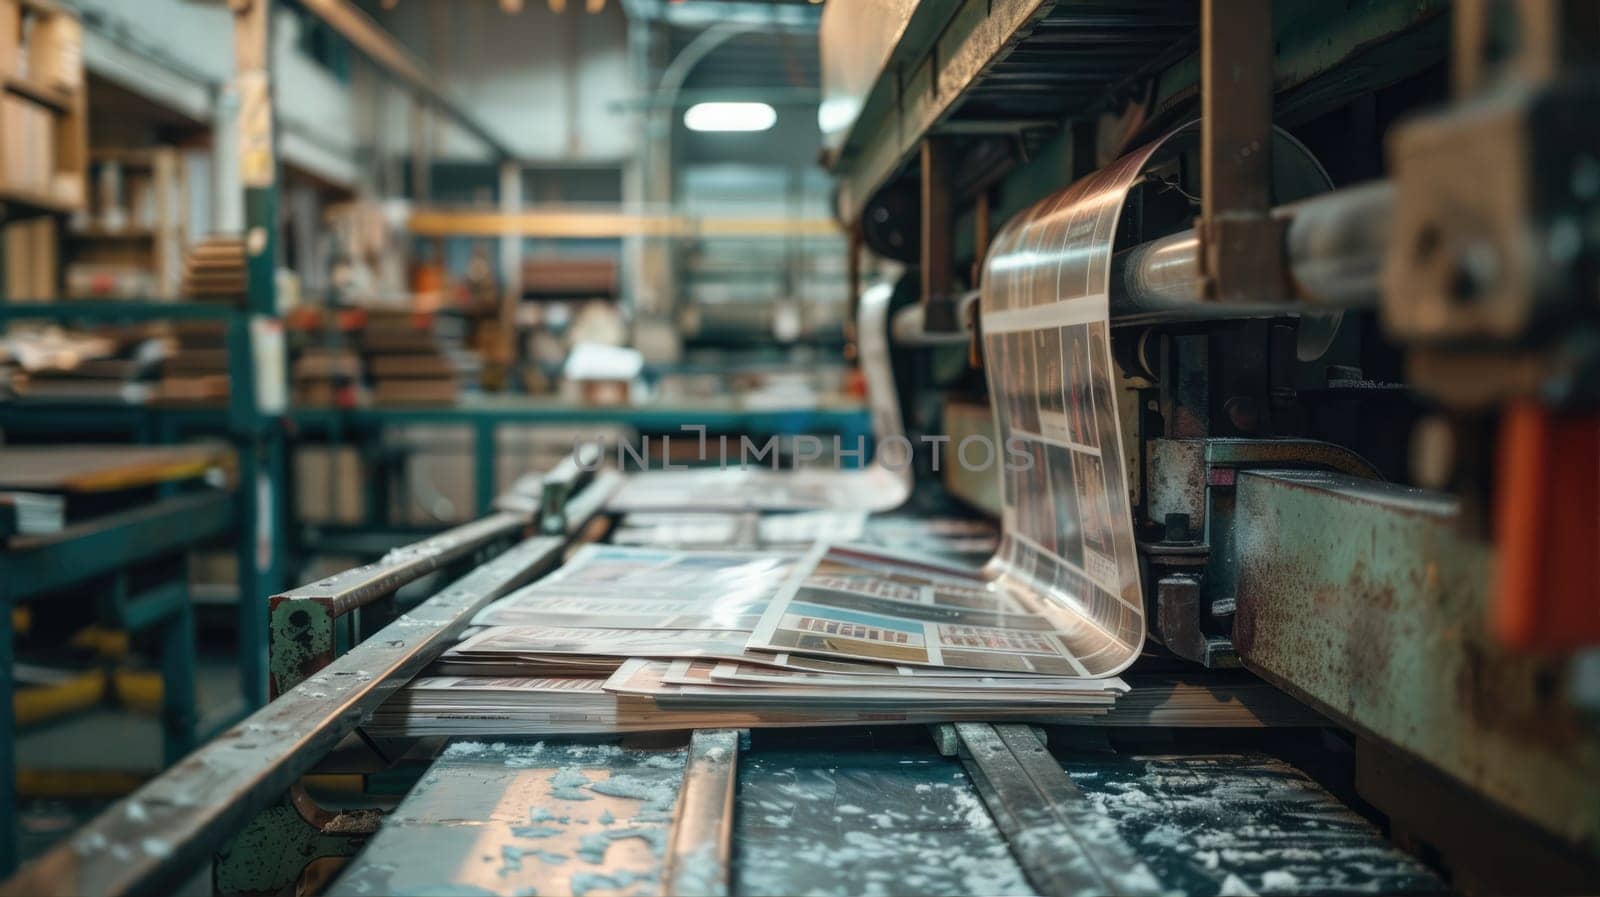 The process of printing magazines and newspapers by natali_brill